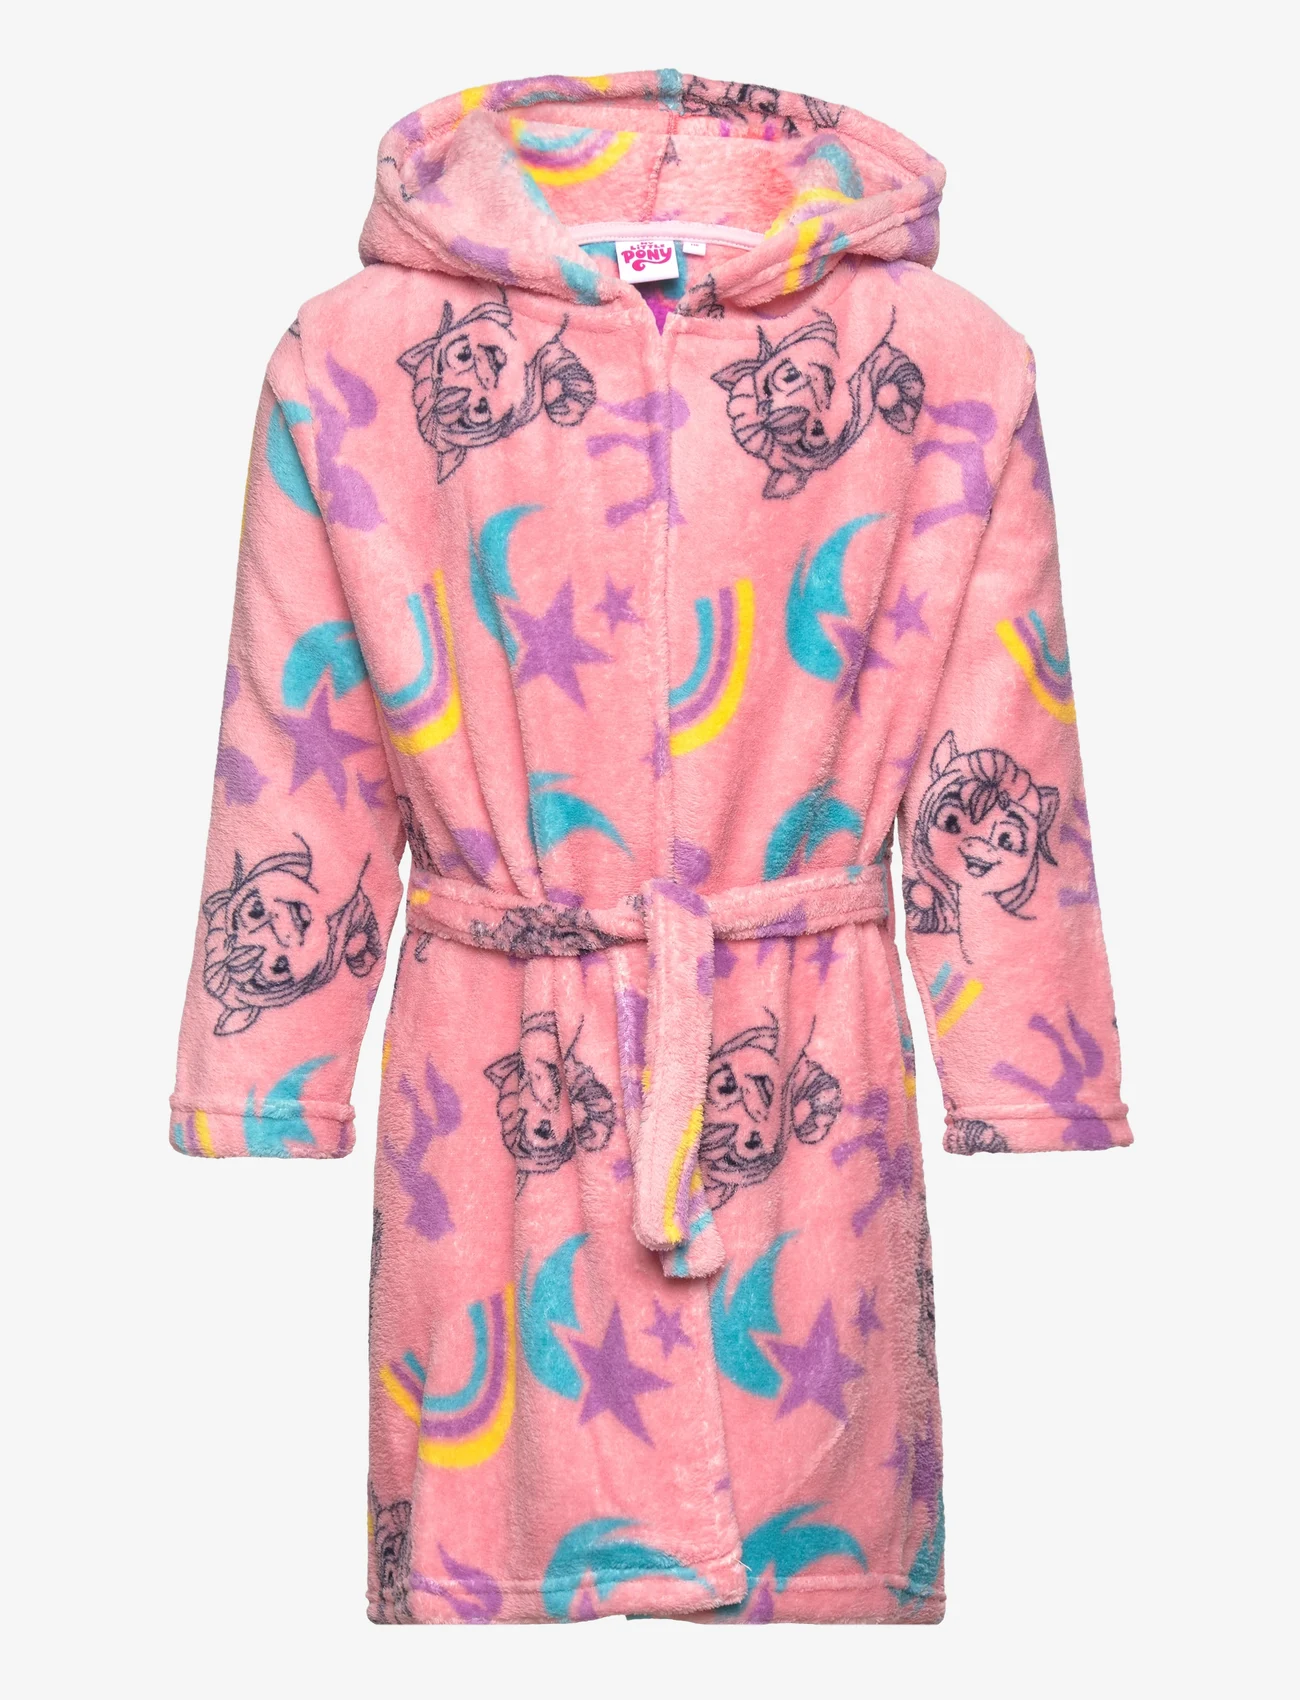 My Little Pony - DRESSING GOWN - laveste priser - pink - 0